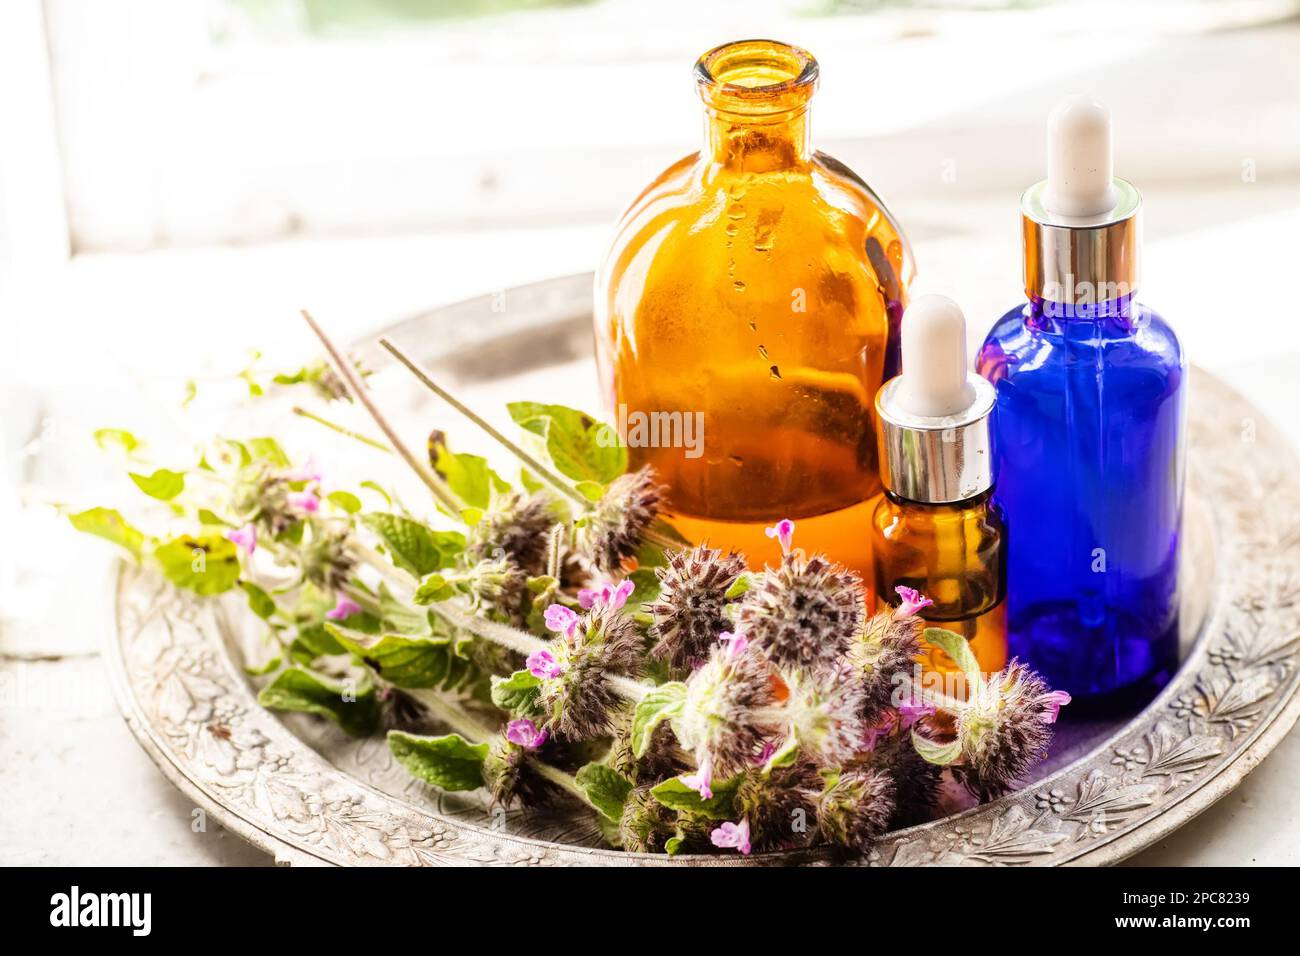 Still life with a bouquet of flowering Clinopodium vulgare, wild basil on an old vintage windowsill with wooden frames Stock Photo